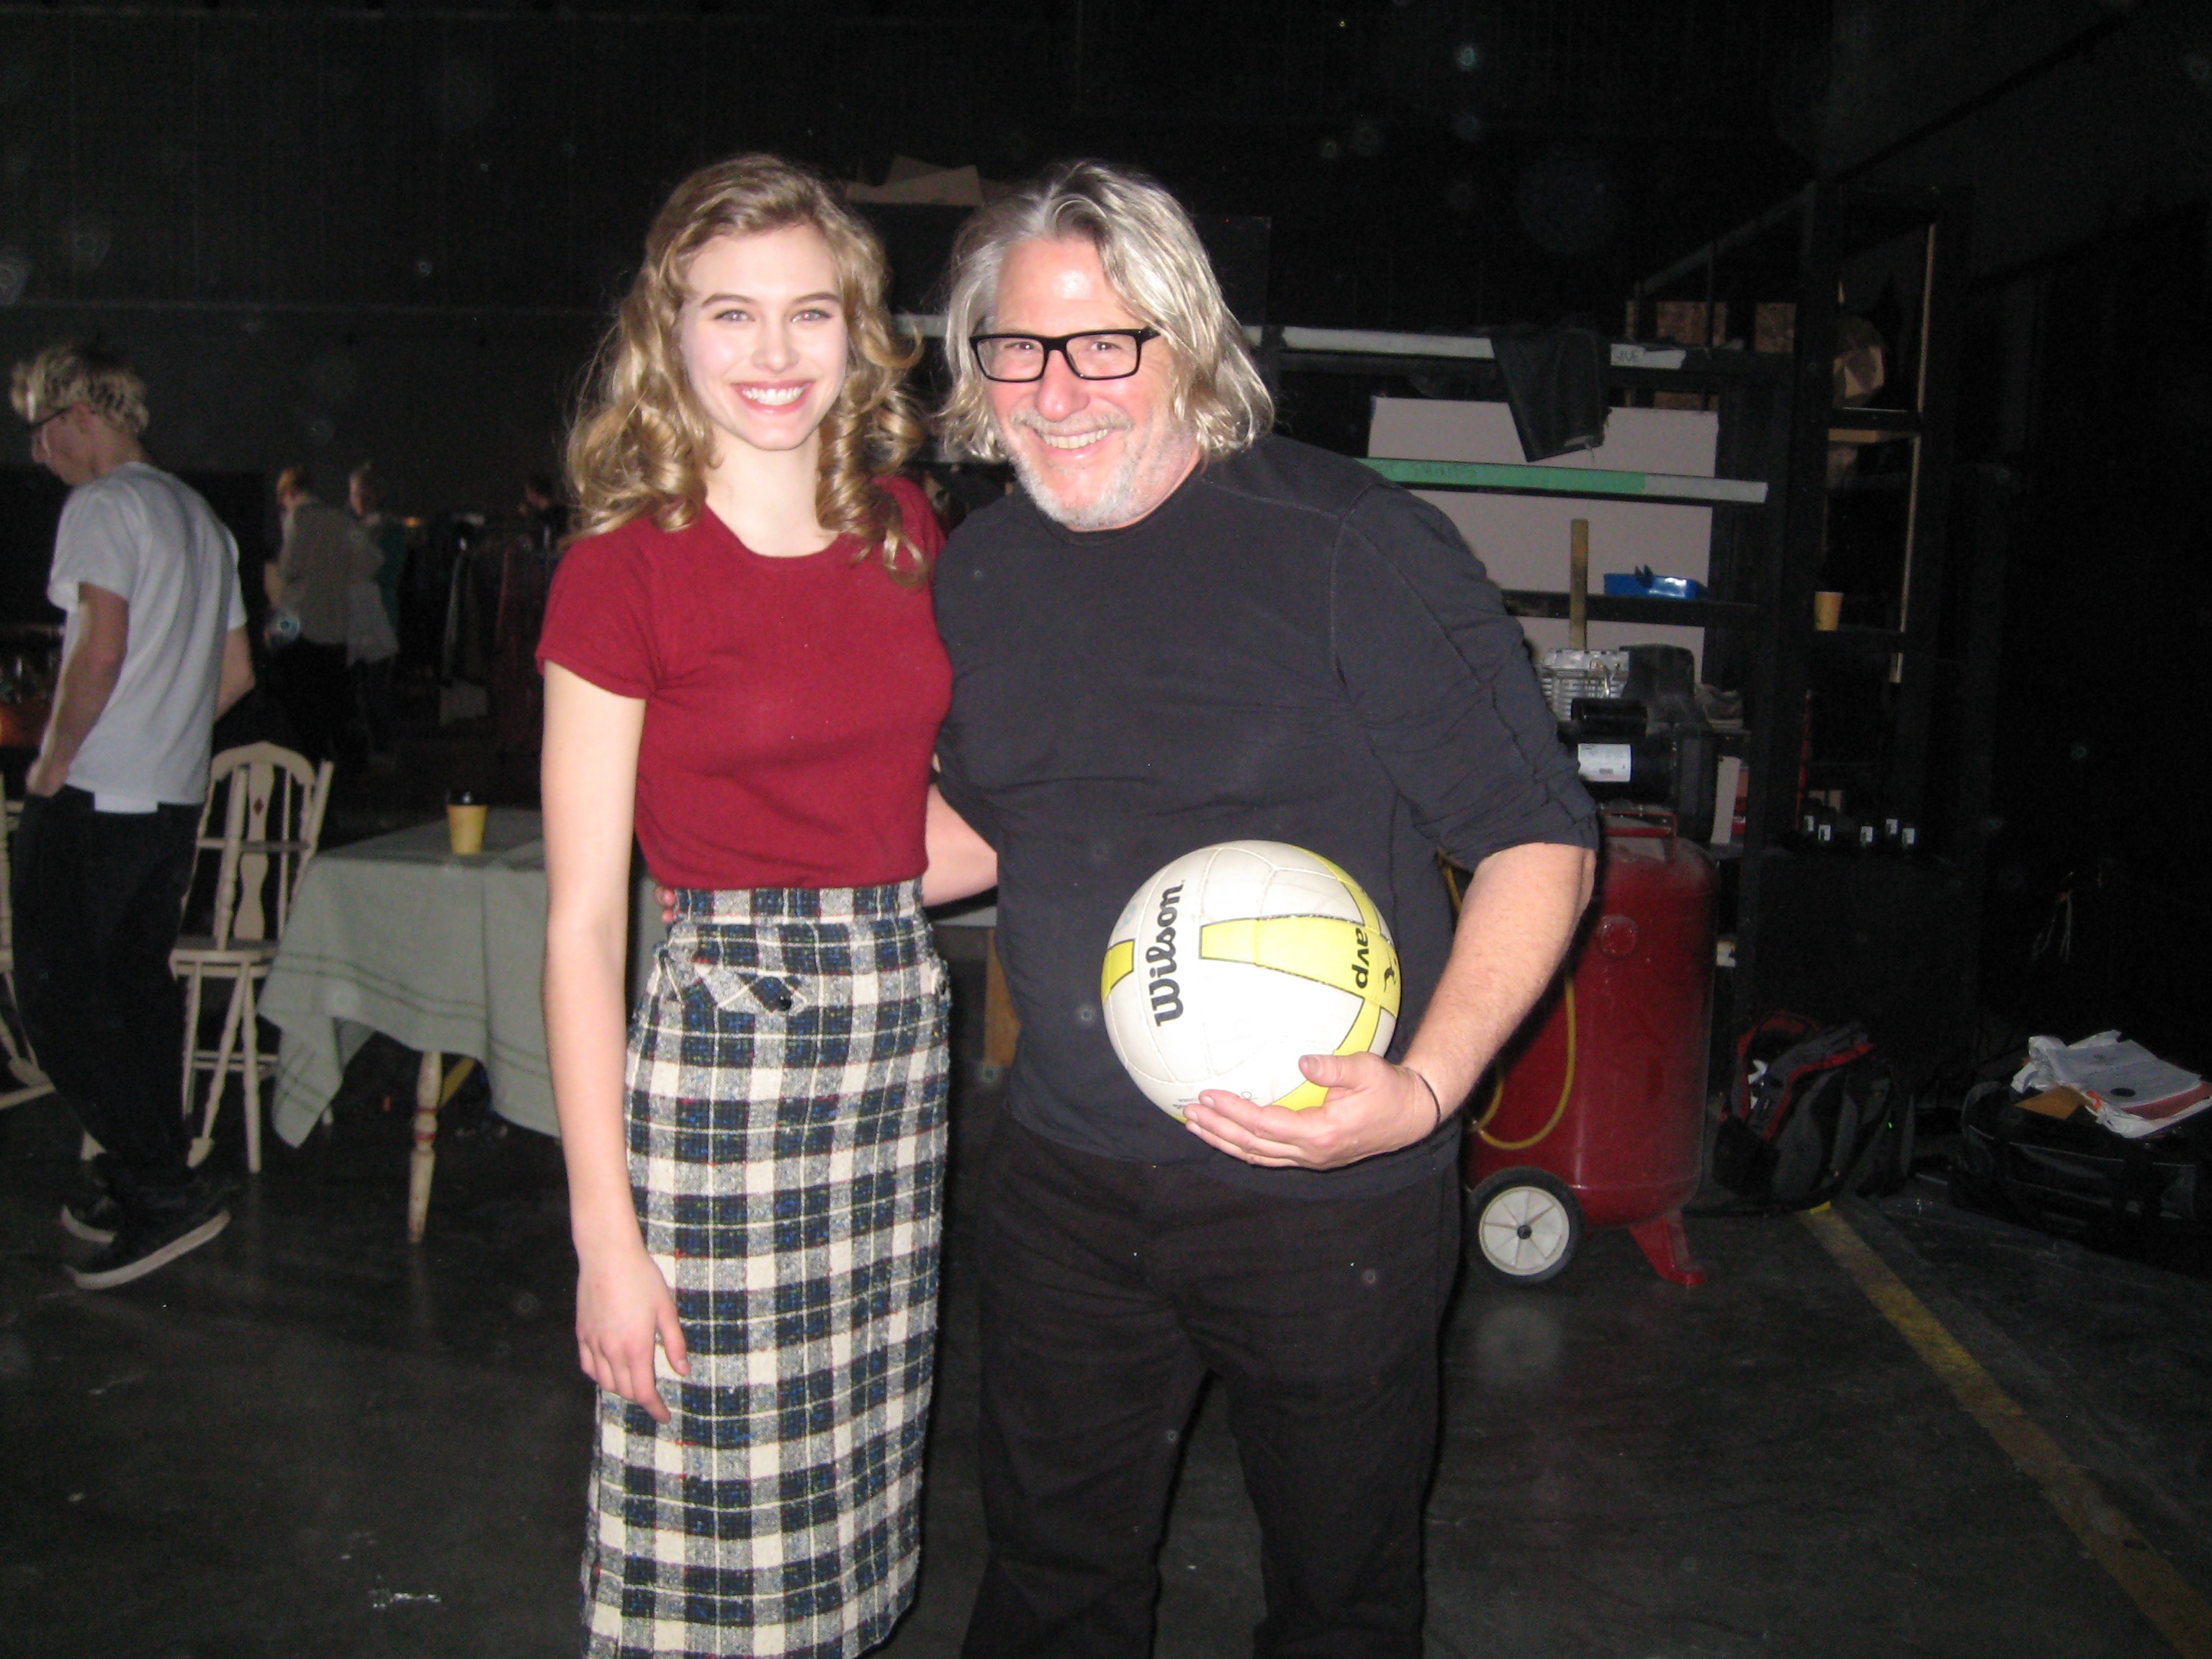 Tiera with Director Brian Levant on the set of A Christmas Story 2.